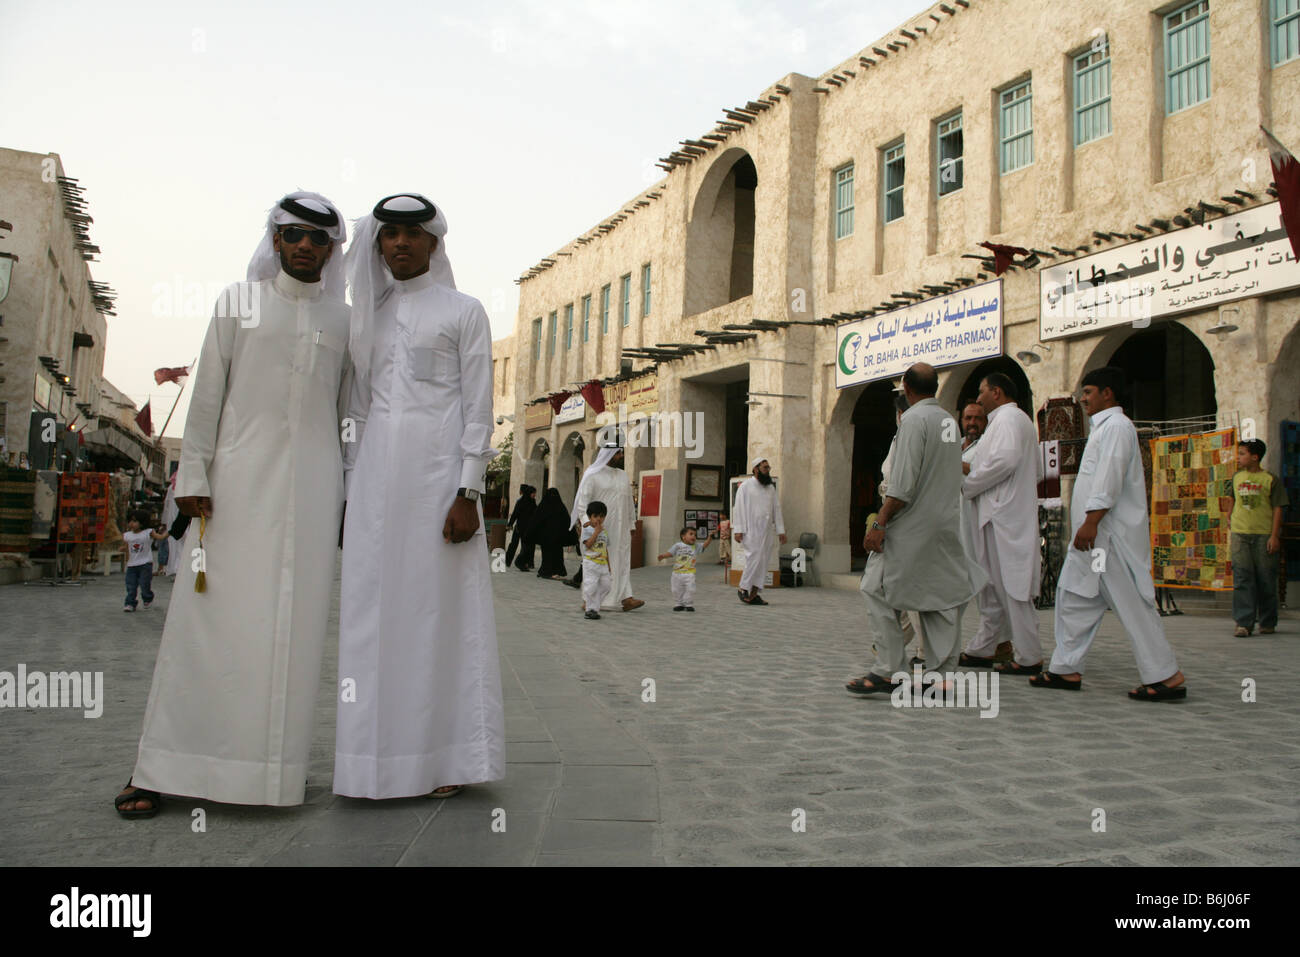 Qatari men in traditional clothing at the Souq Waqif market, portrait,  Doha, Qatar, Middle East Stock Photo - Alamy